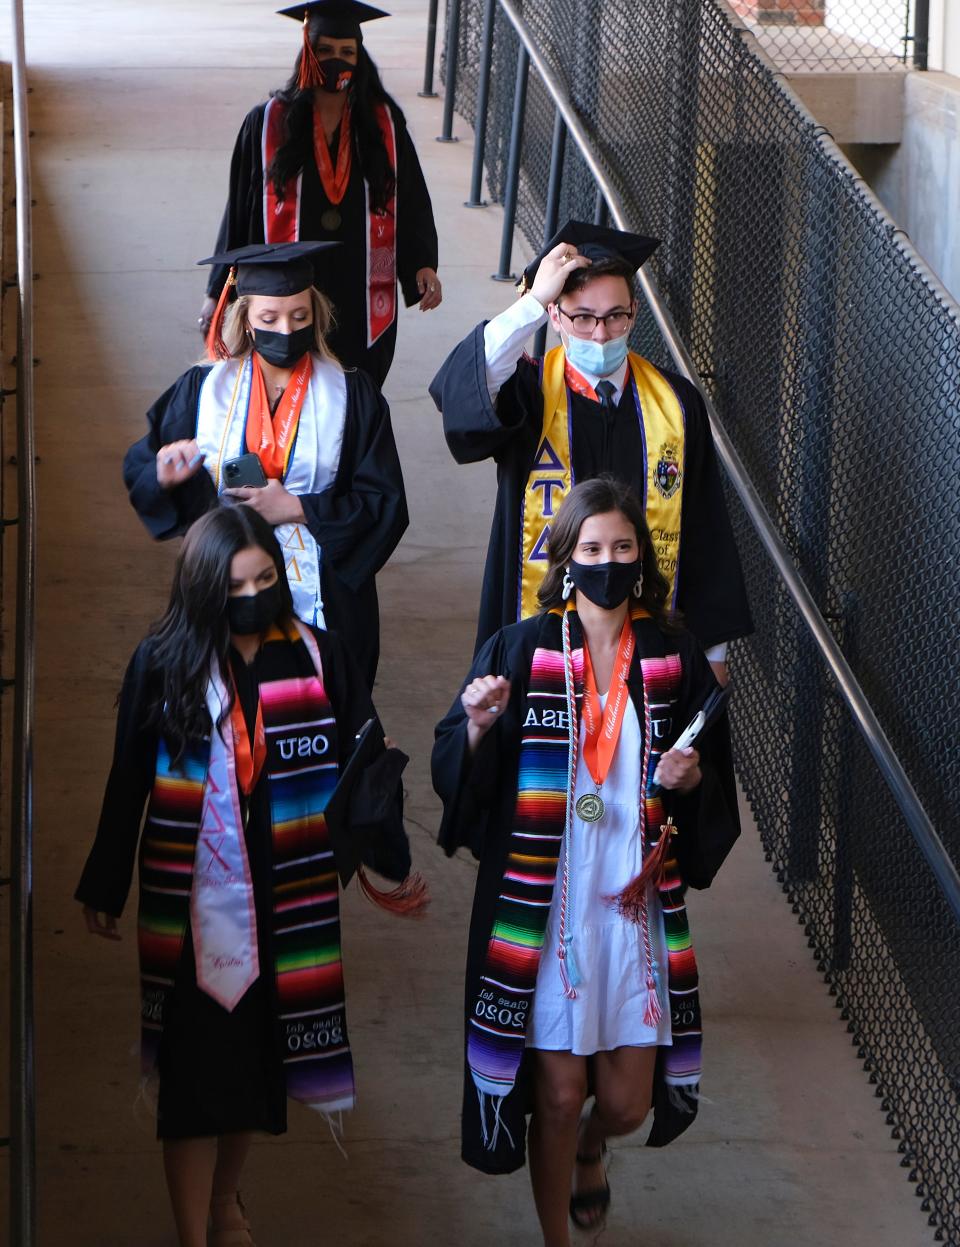 Graduates head to the field May 8, 2021, at Oklahoma State University's first in-person graduation ceremony since December 2019 and the first time in Boone Pickens Stadium since 2006.